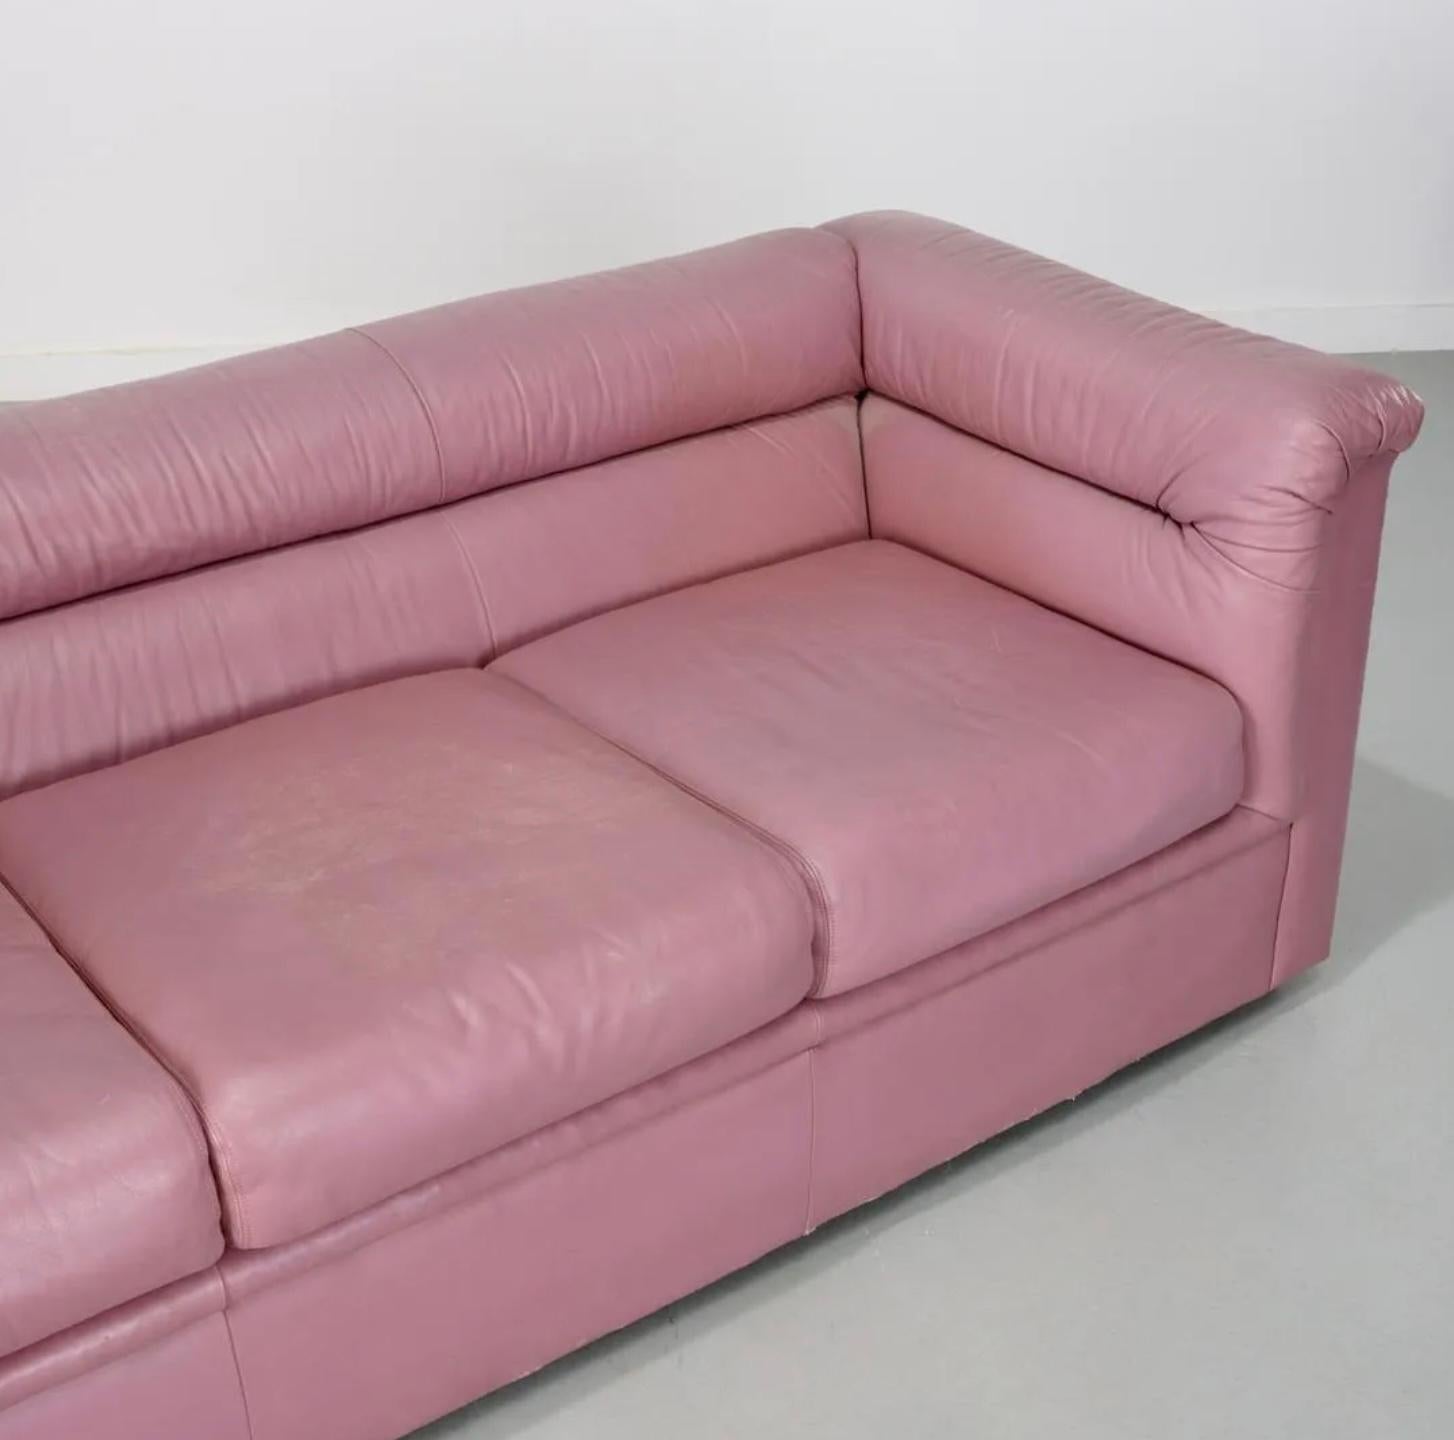 Clean midcentury post modern 3 seat Pink leather puffy sofa circa 1980 by Selig. This sofa is a time capsule from the 1980s/1990s with puffy side arms and back cushions and 3 lower cushions. The sofa is all original in very nice condition. Very